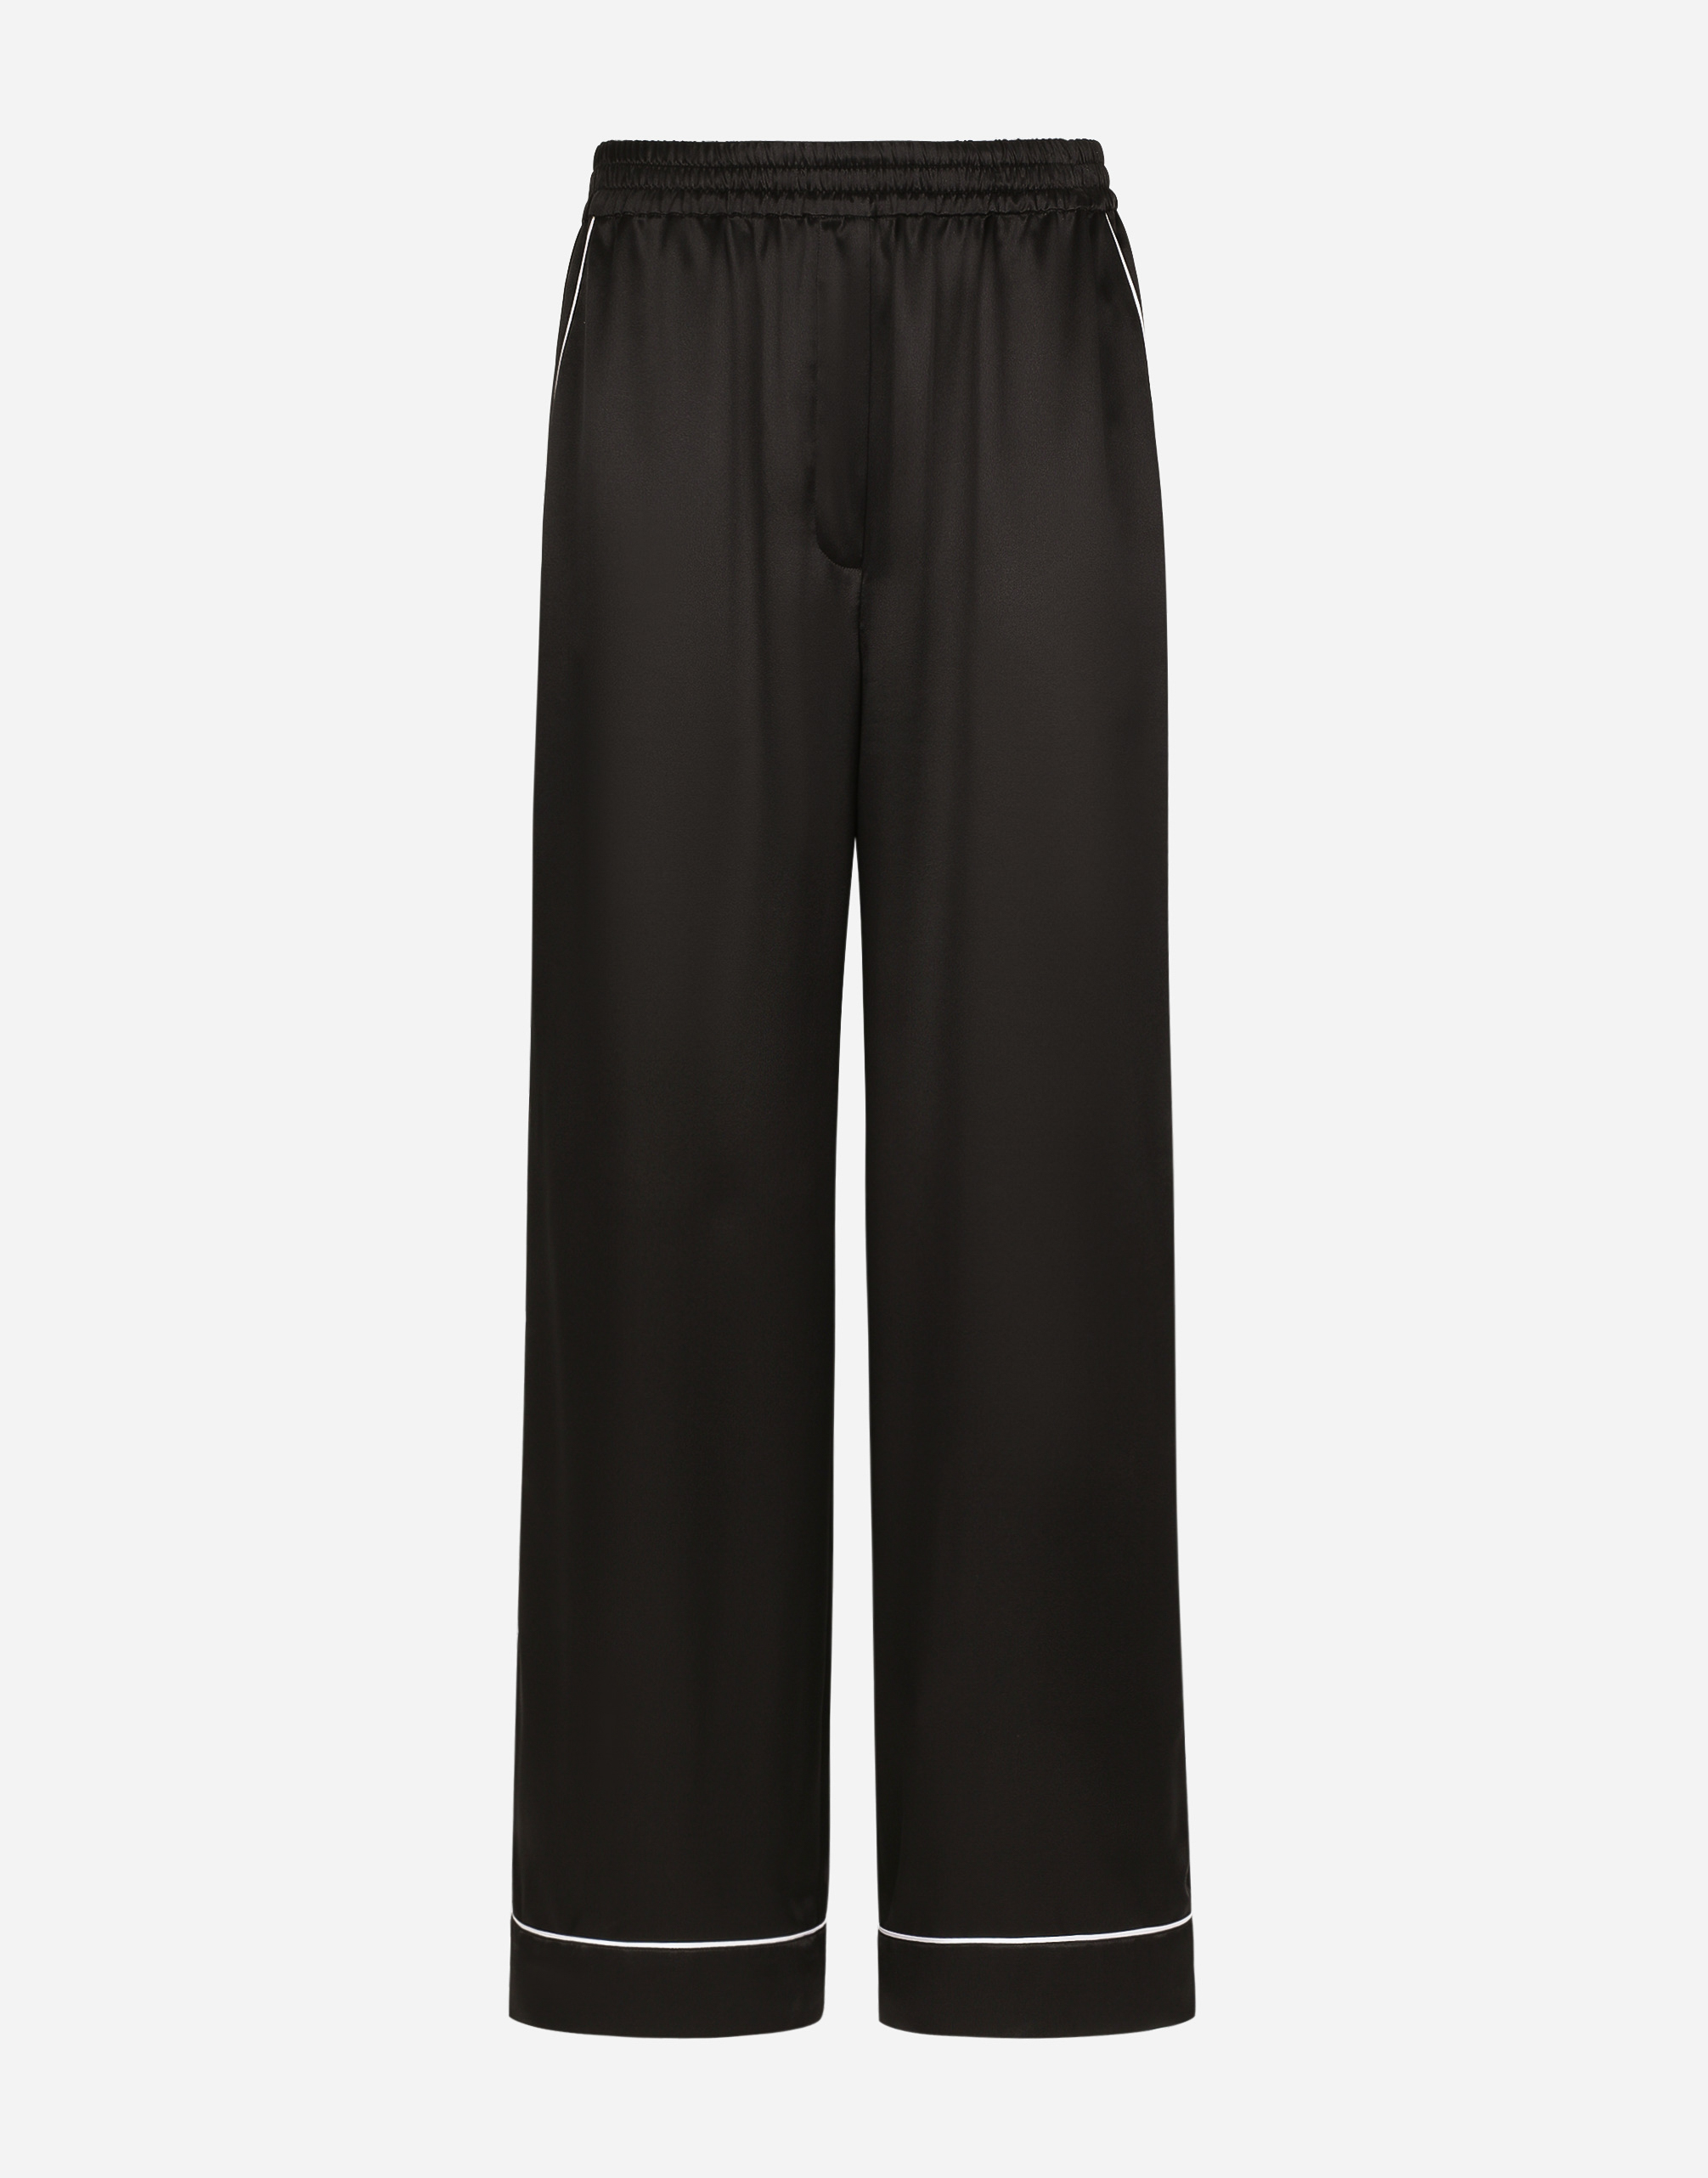 Dolce & Gabbana Silk Pajama Pants With Contrasting Piping In Black